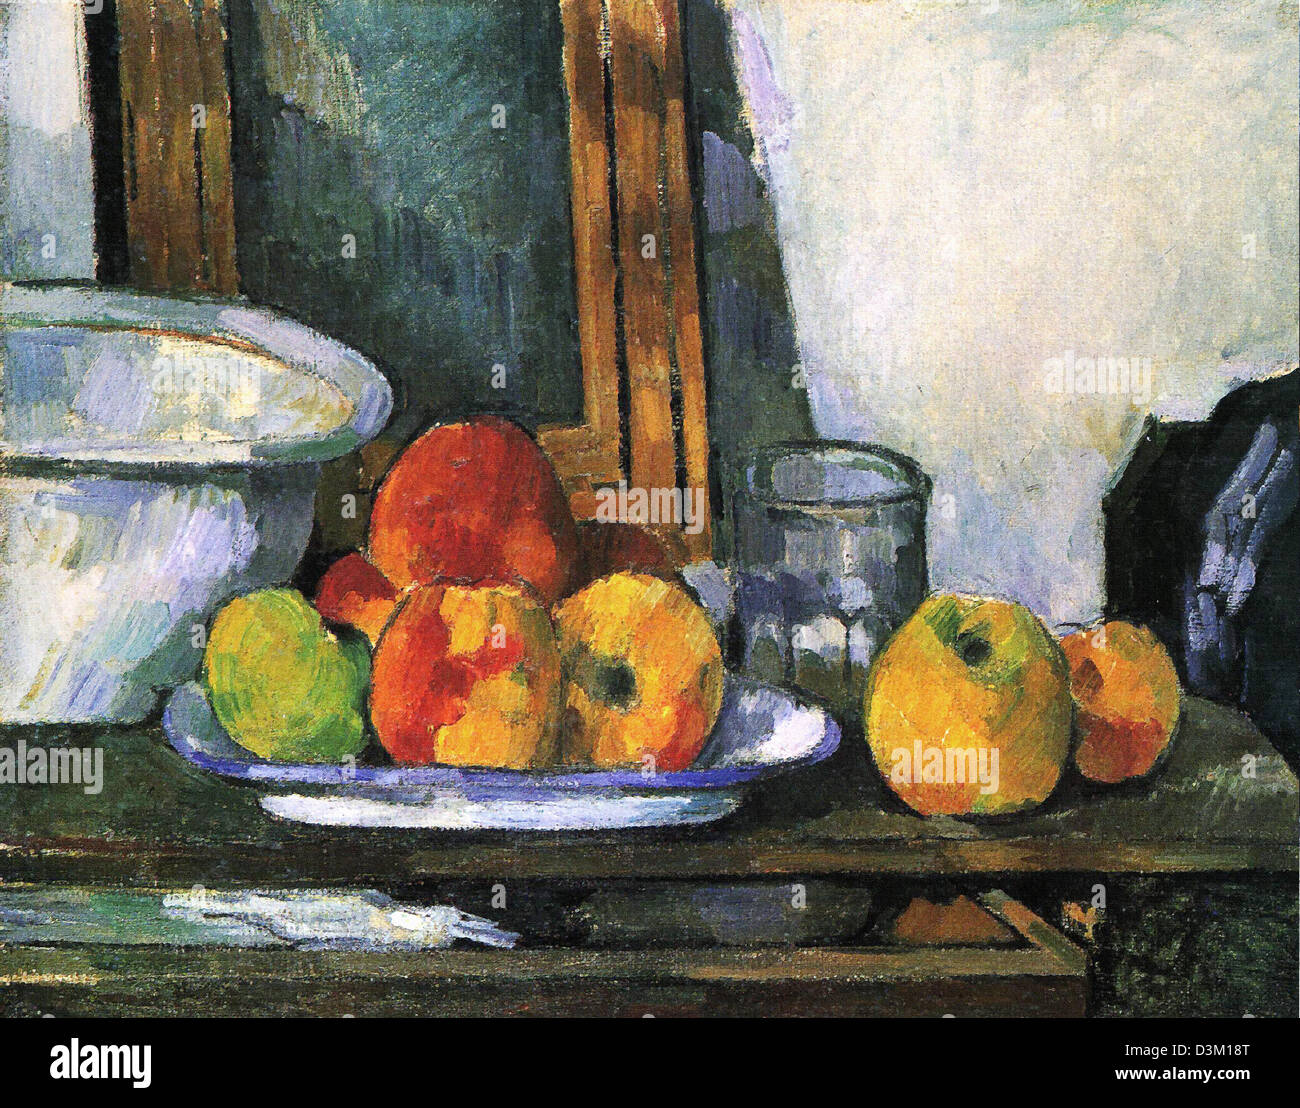 Paul Cezanne, Still Life with Open Drawer 1877-1879 Oil on canvas. Stock Photo